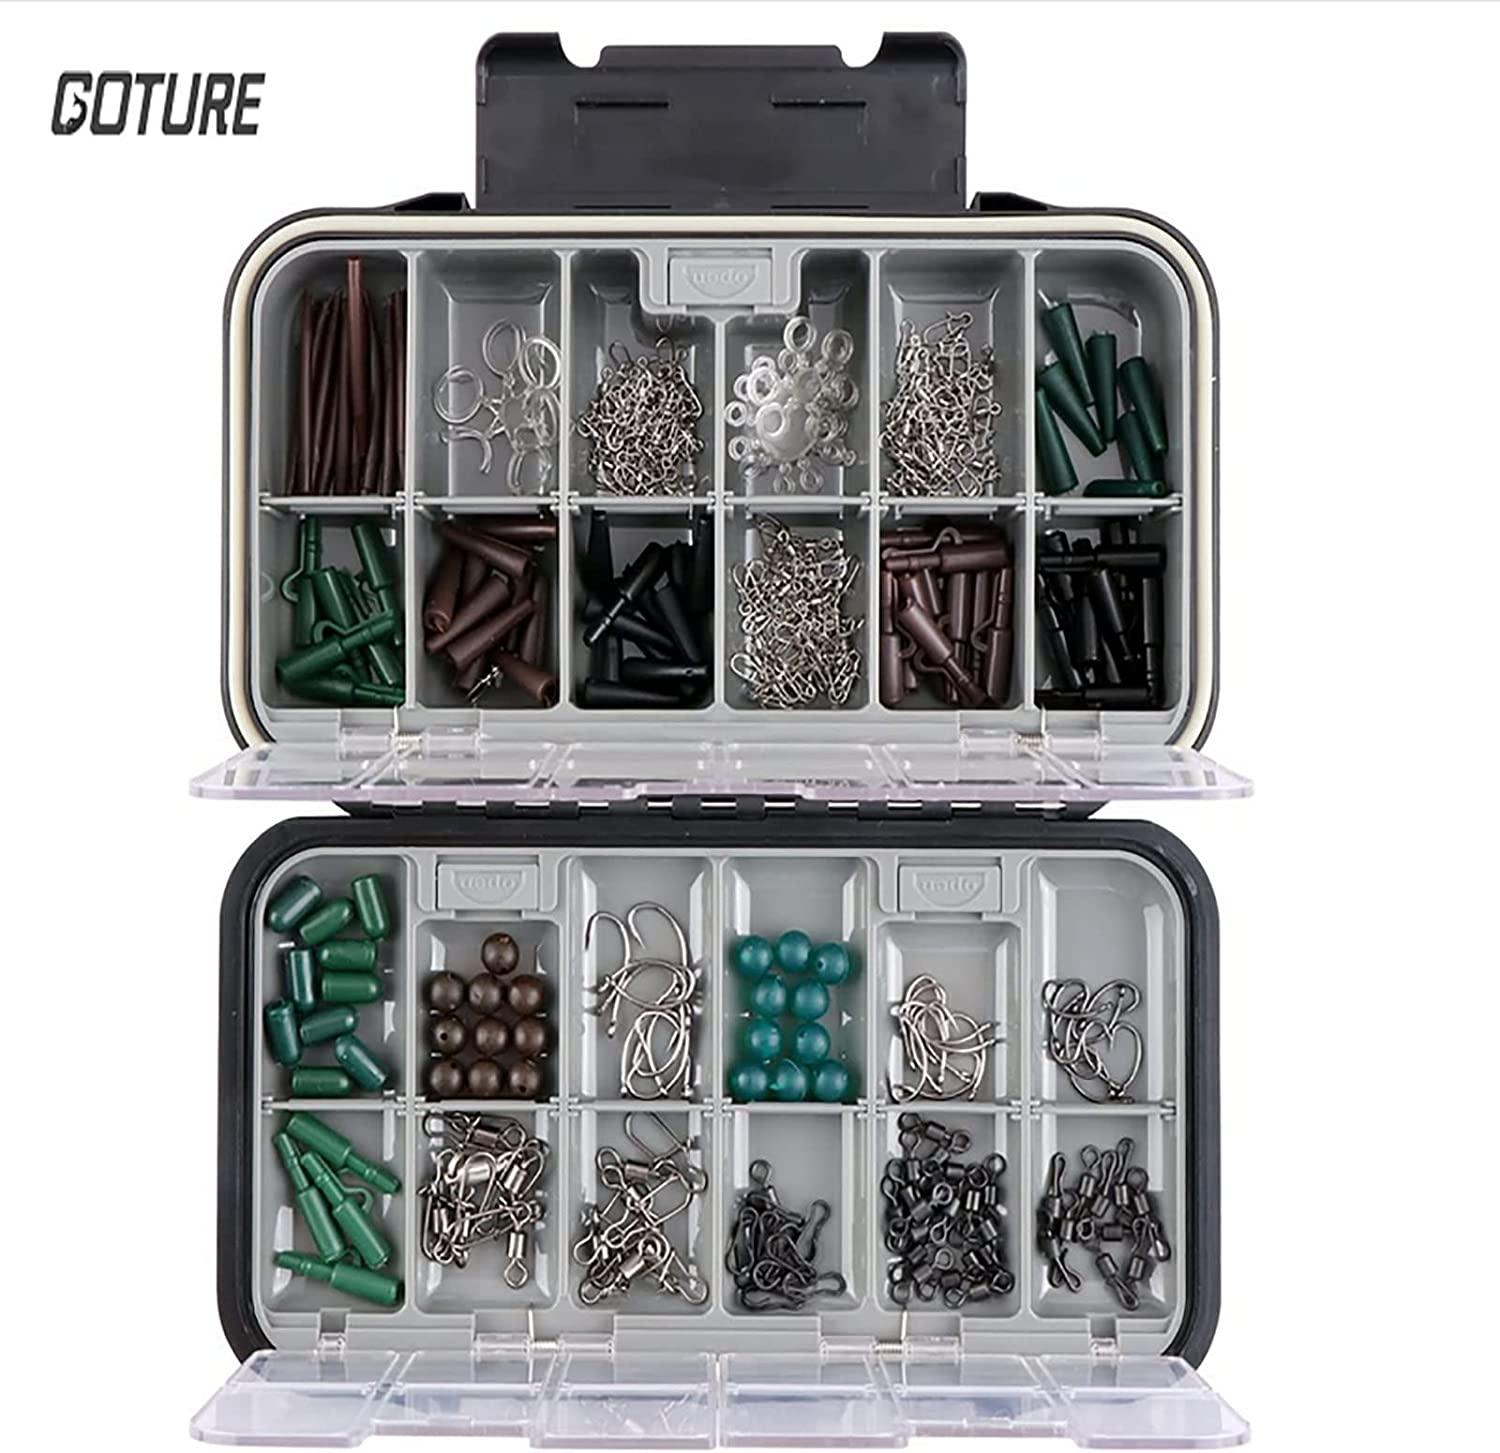 Goture Waterproof//2-sided//Fishing-Lure-Boxes-Bait,Small-Case